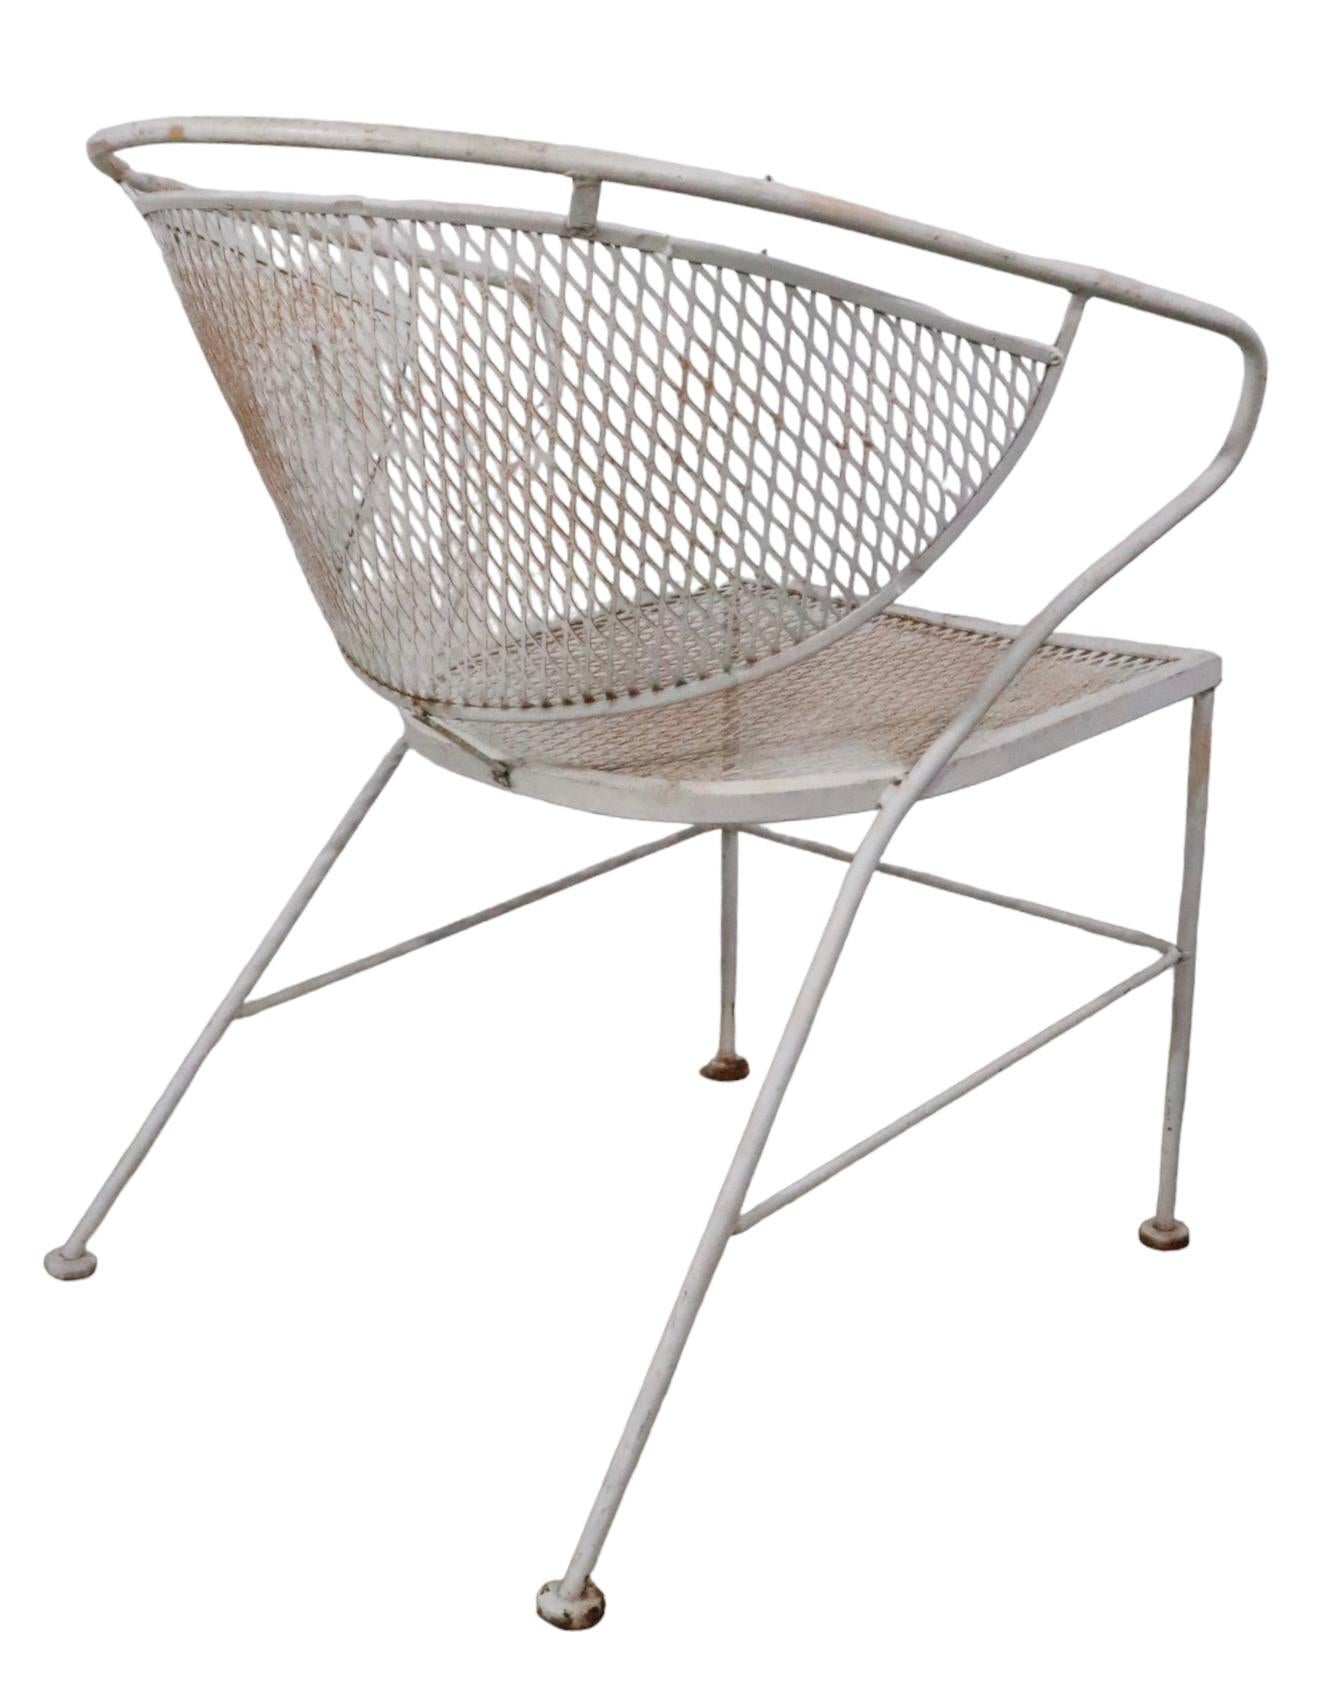 Wrought Iron and Metal Mesh Garden Side, Dining Chair by Salterini, C 1950s In Good Condition For Sale In New York, NY